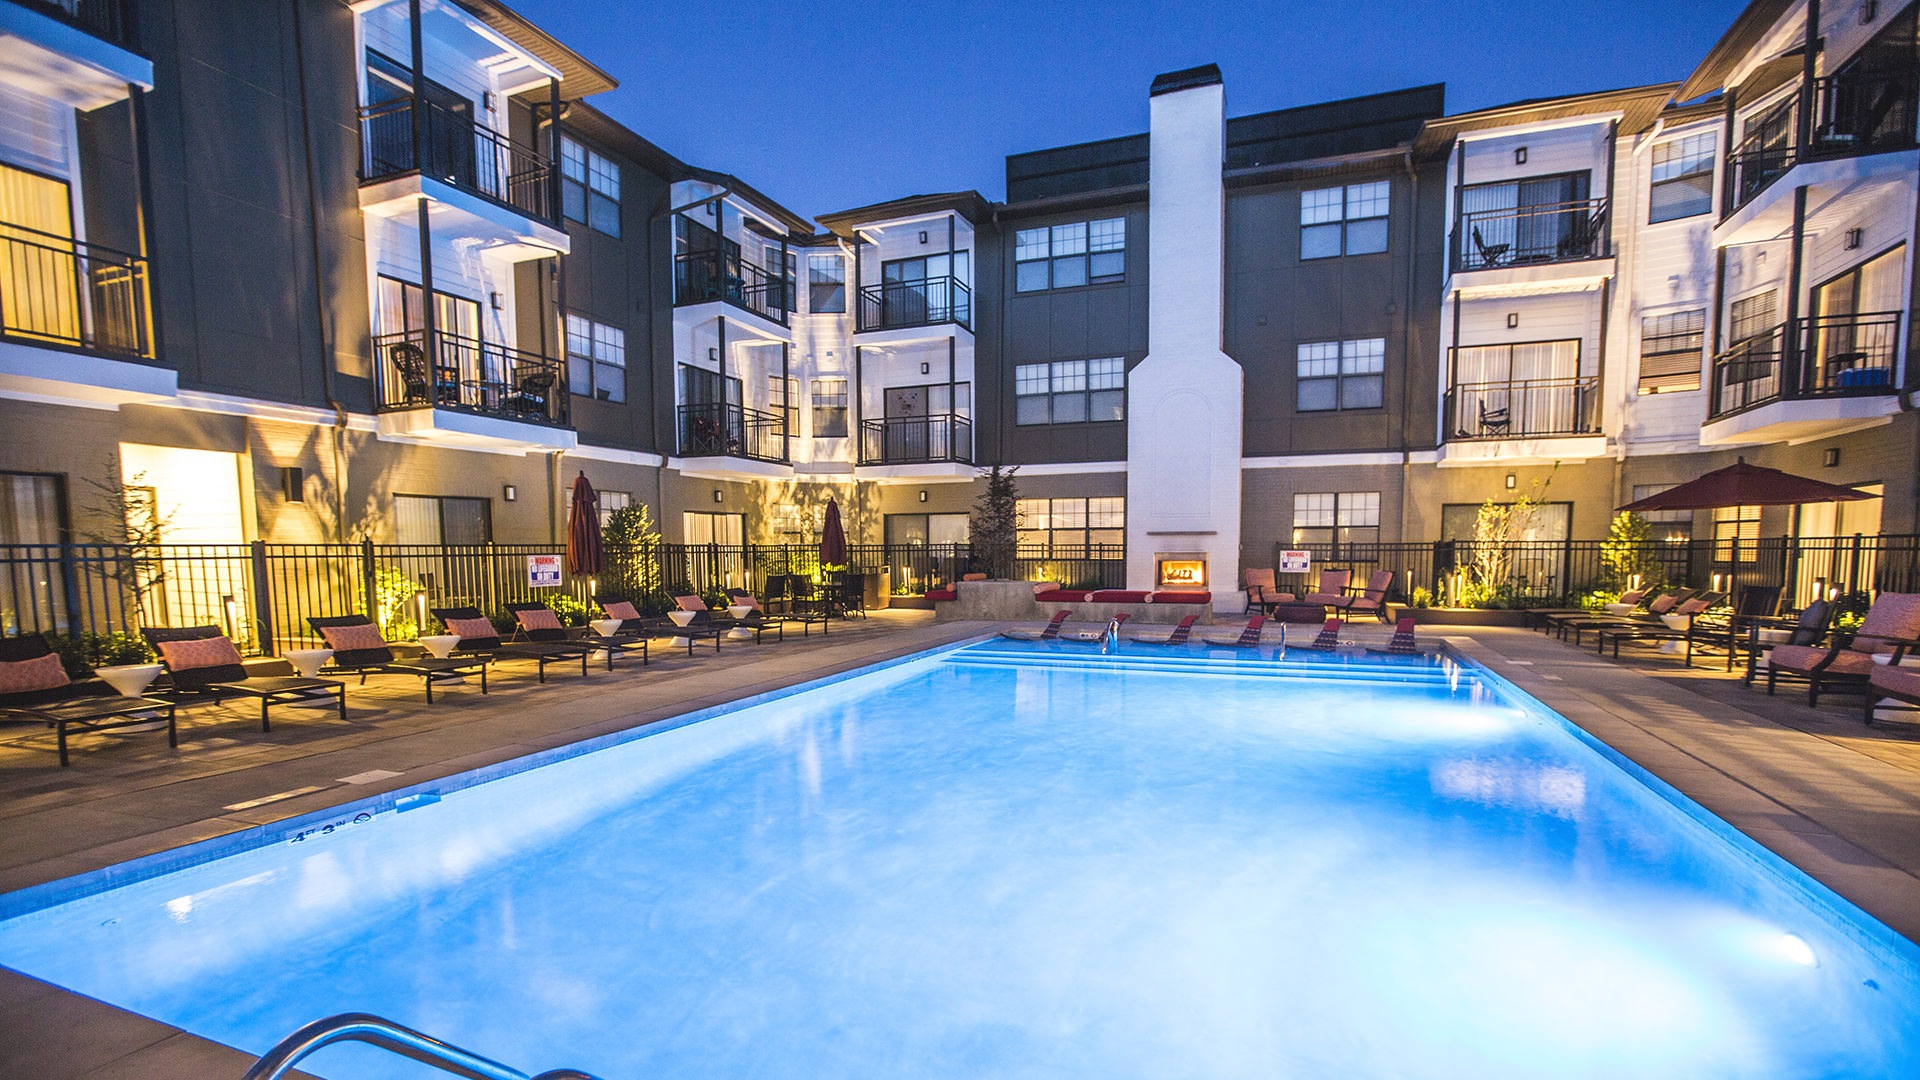 Resort-Style Pool At Our Apartments In Grandview Heights, Ohio